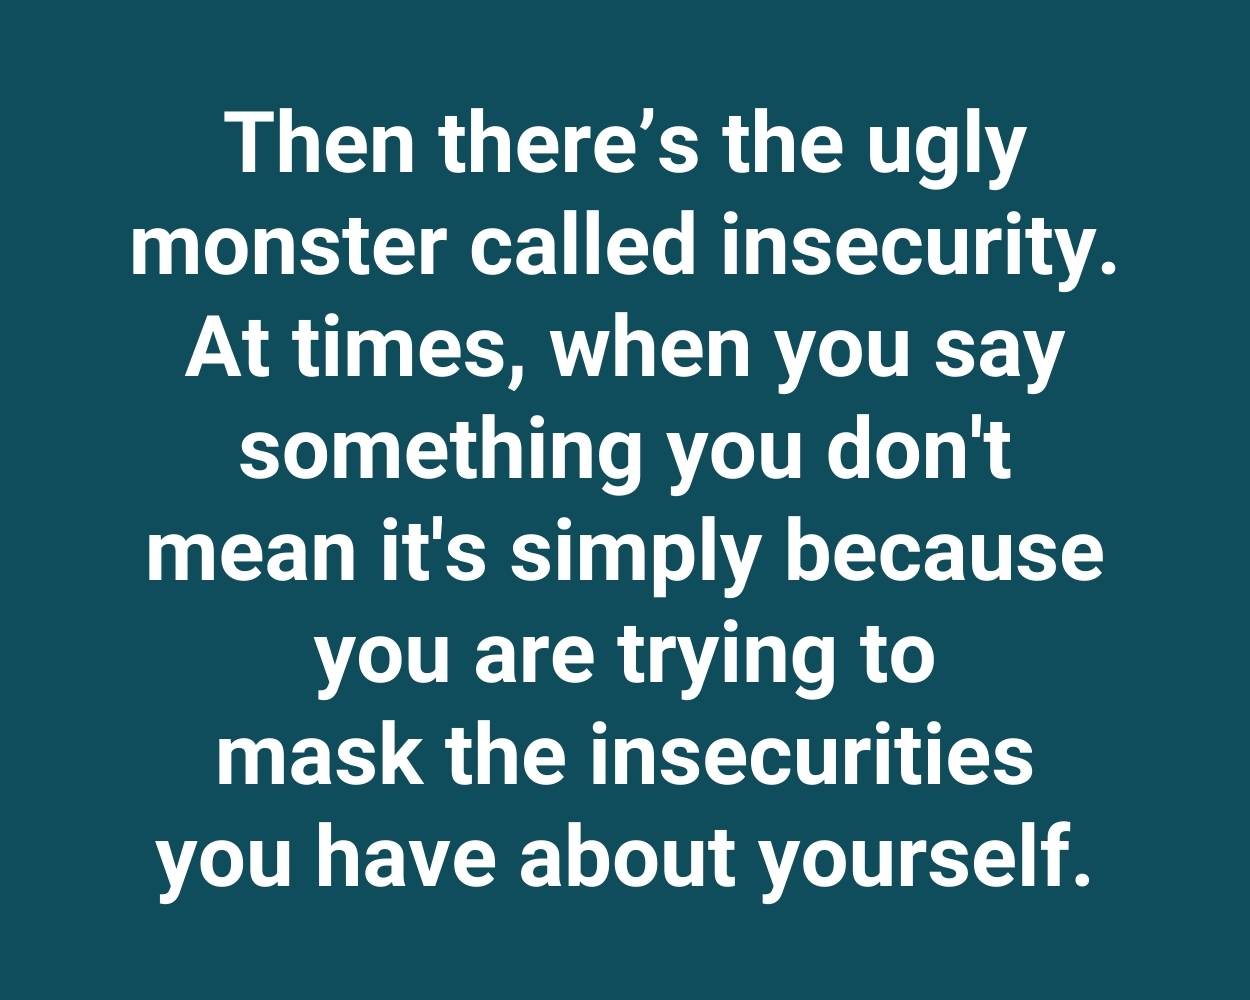 Then there’s the ugly monster called insecurity. At times, when you say something you don't mean it's simply because you are trying to mask the insecurities you have about yourself.